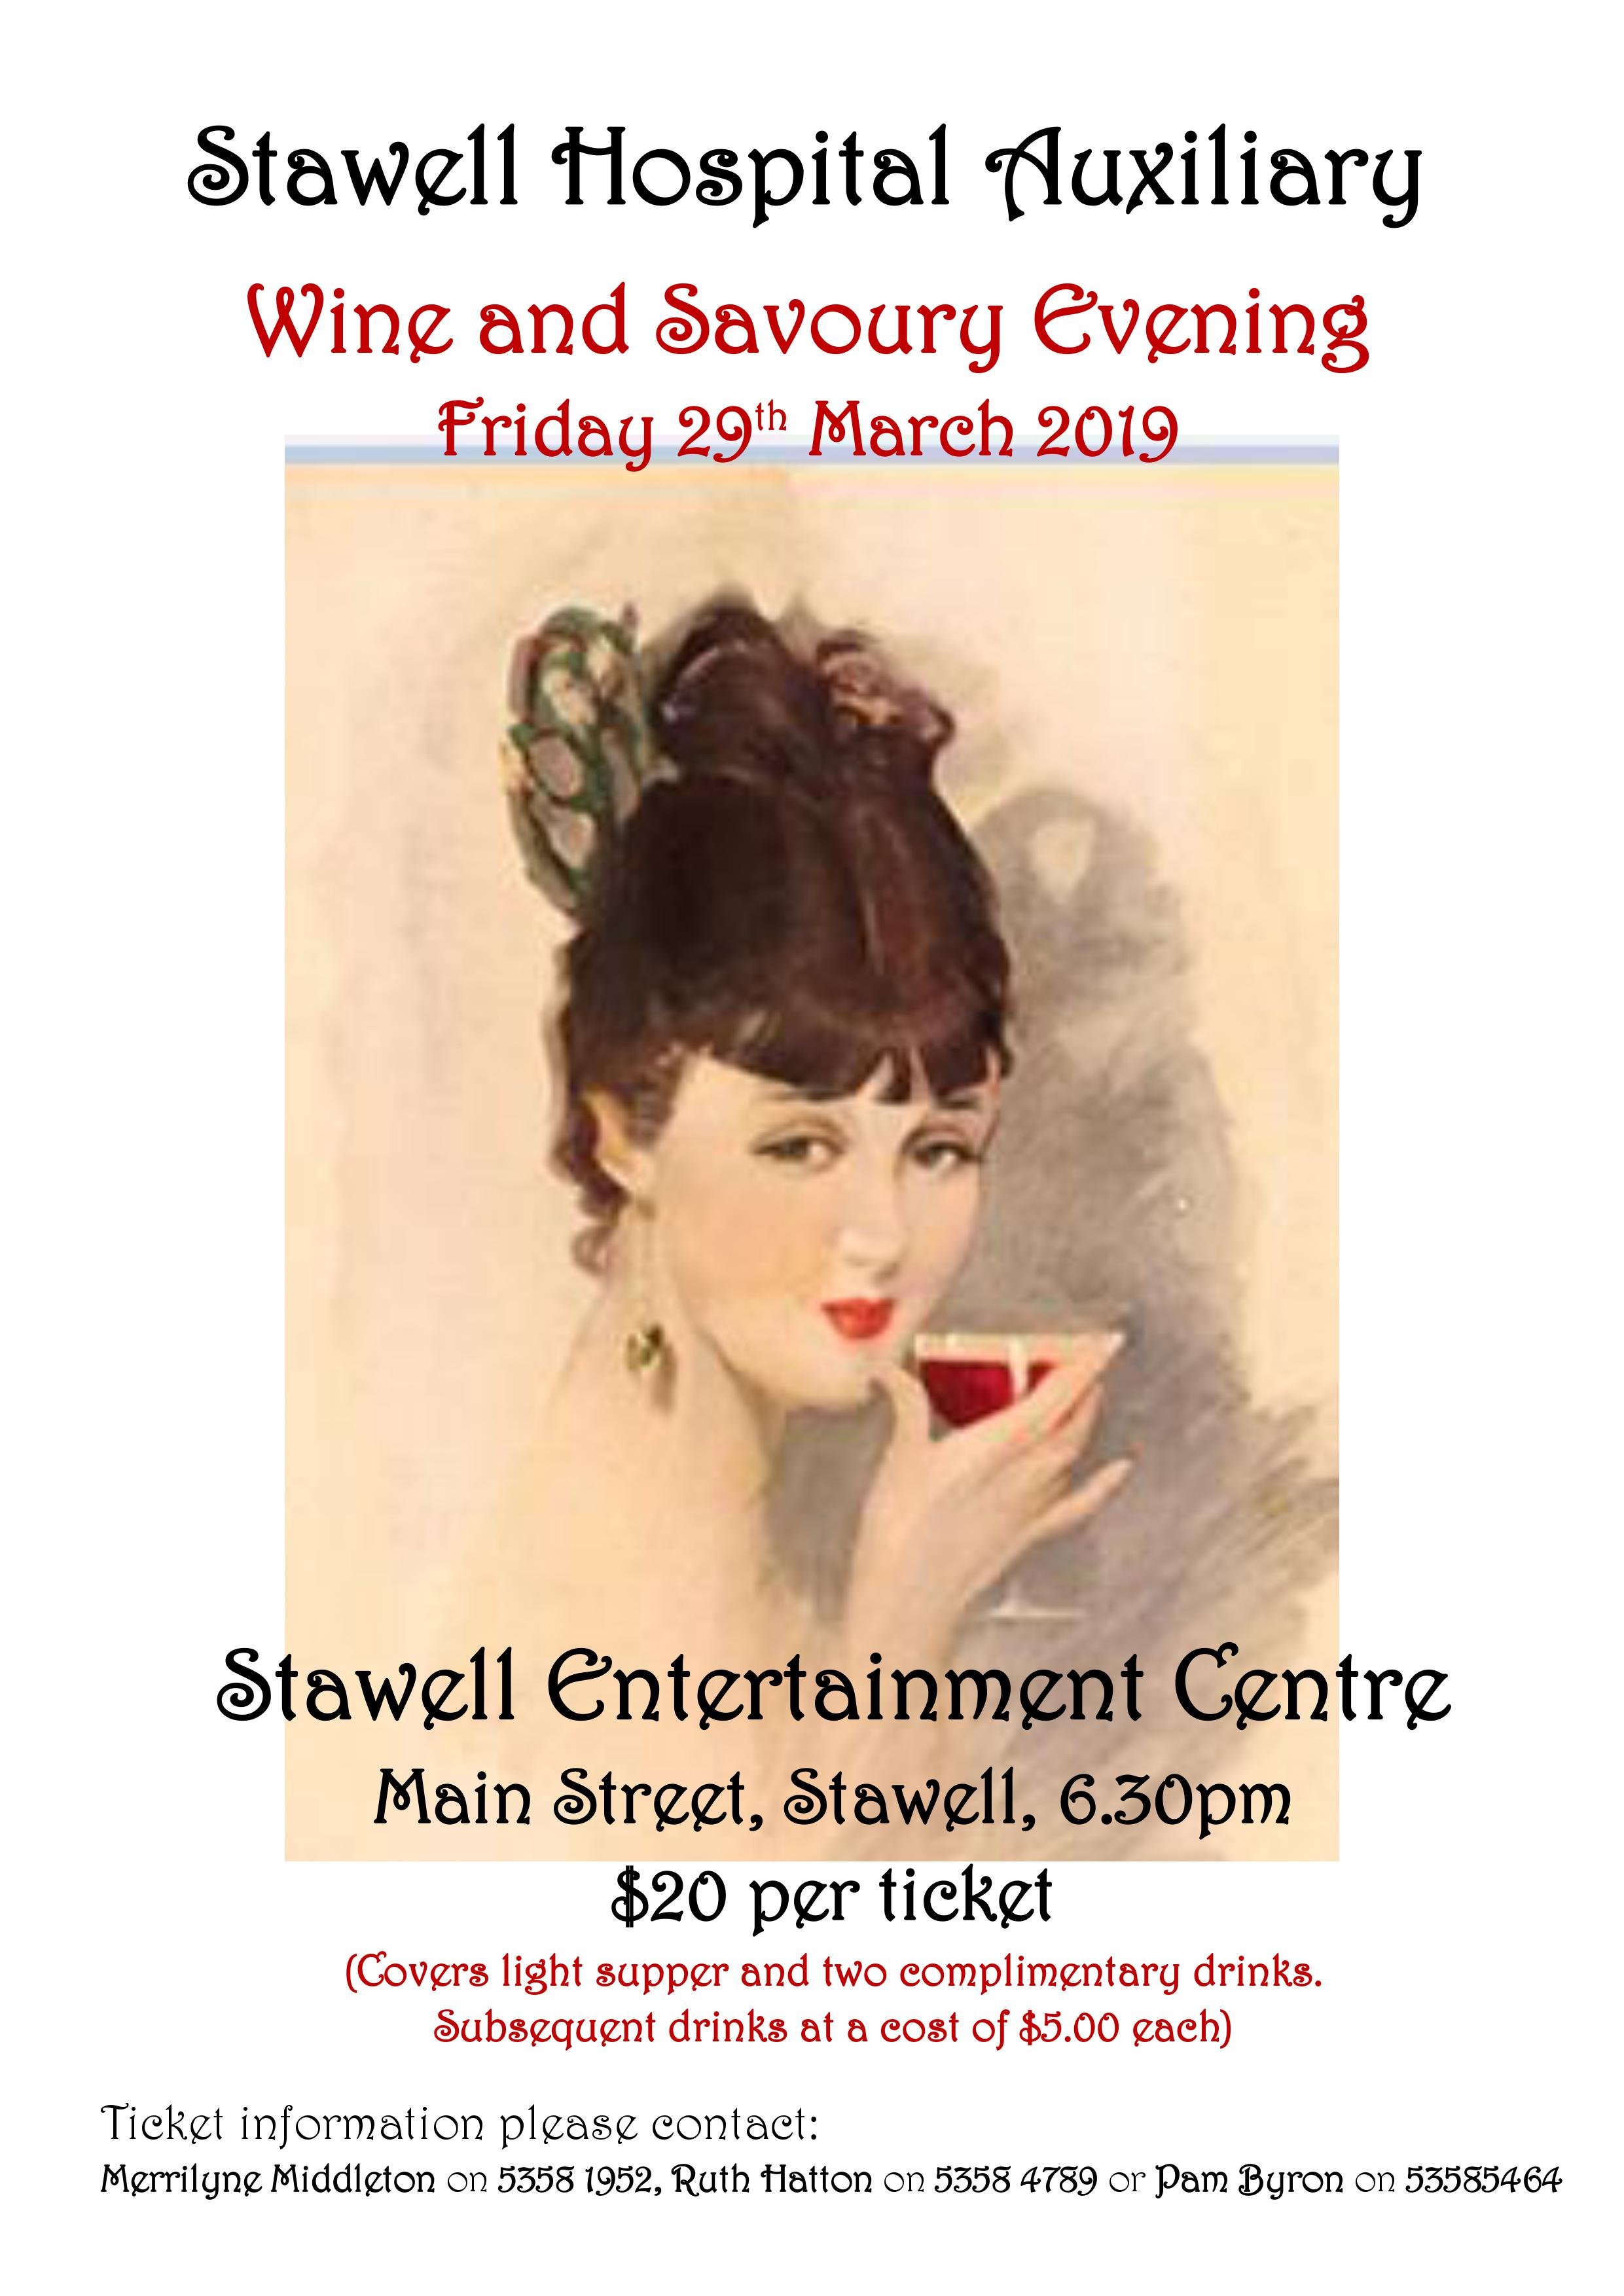 Ladies Auxiliary Wine and Savoury Evening 29th March Stawell Entertainment Centre 29th March